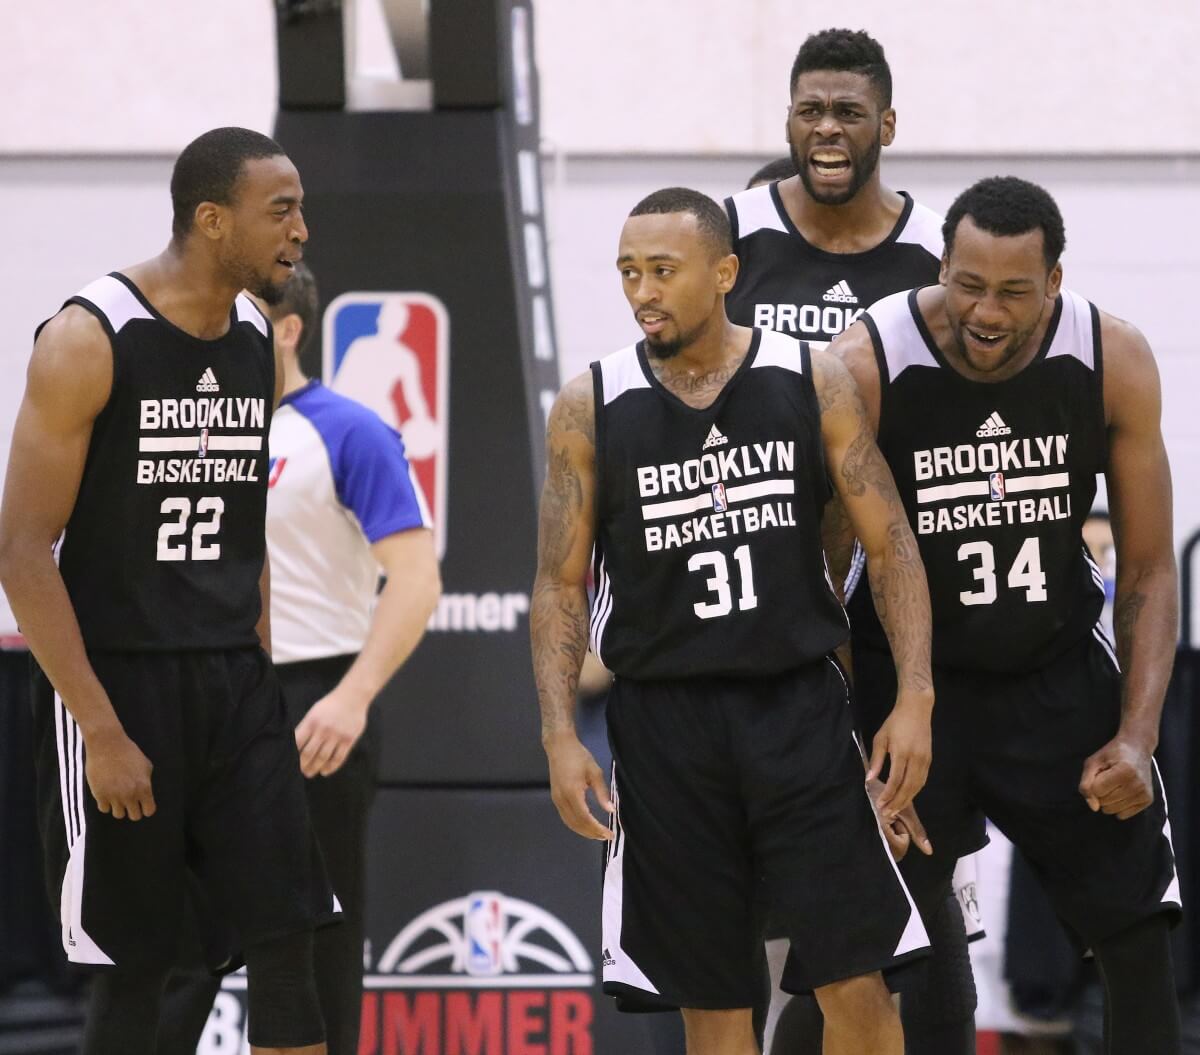 The Nets' Summer League time is over. (AP)